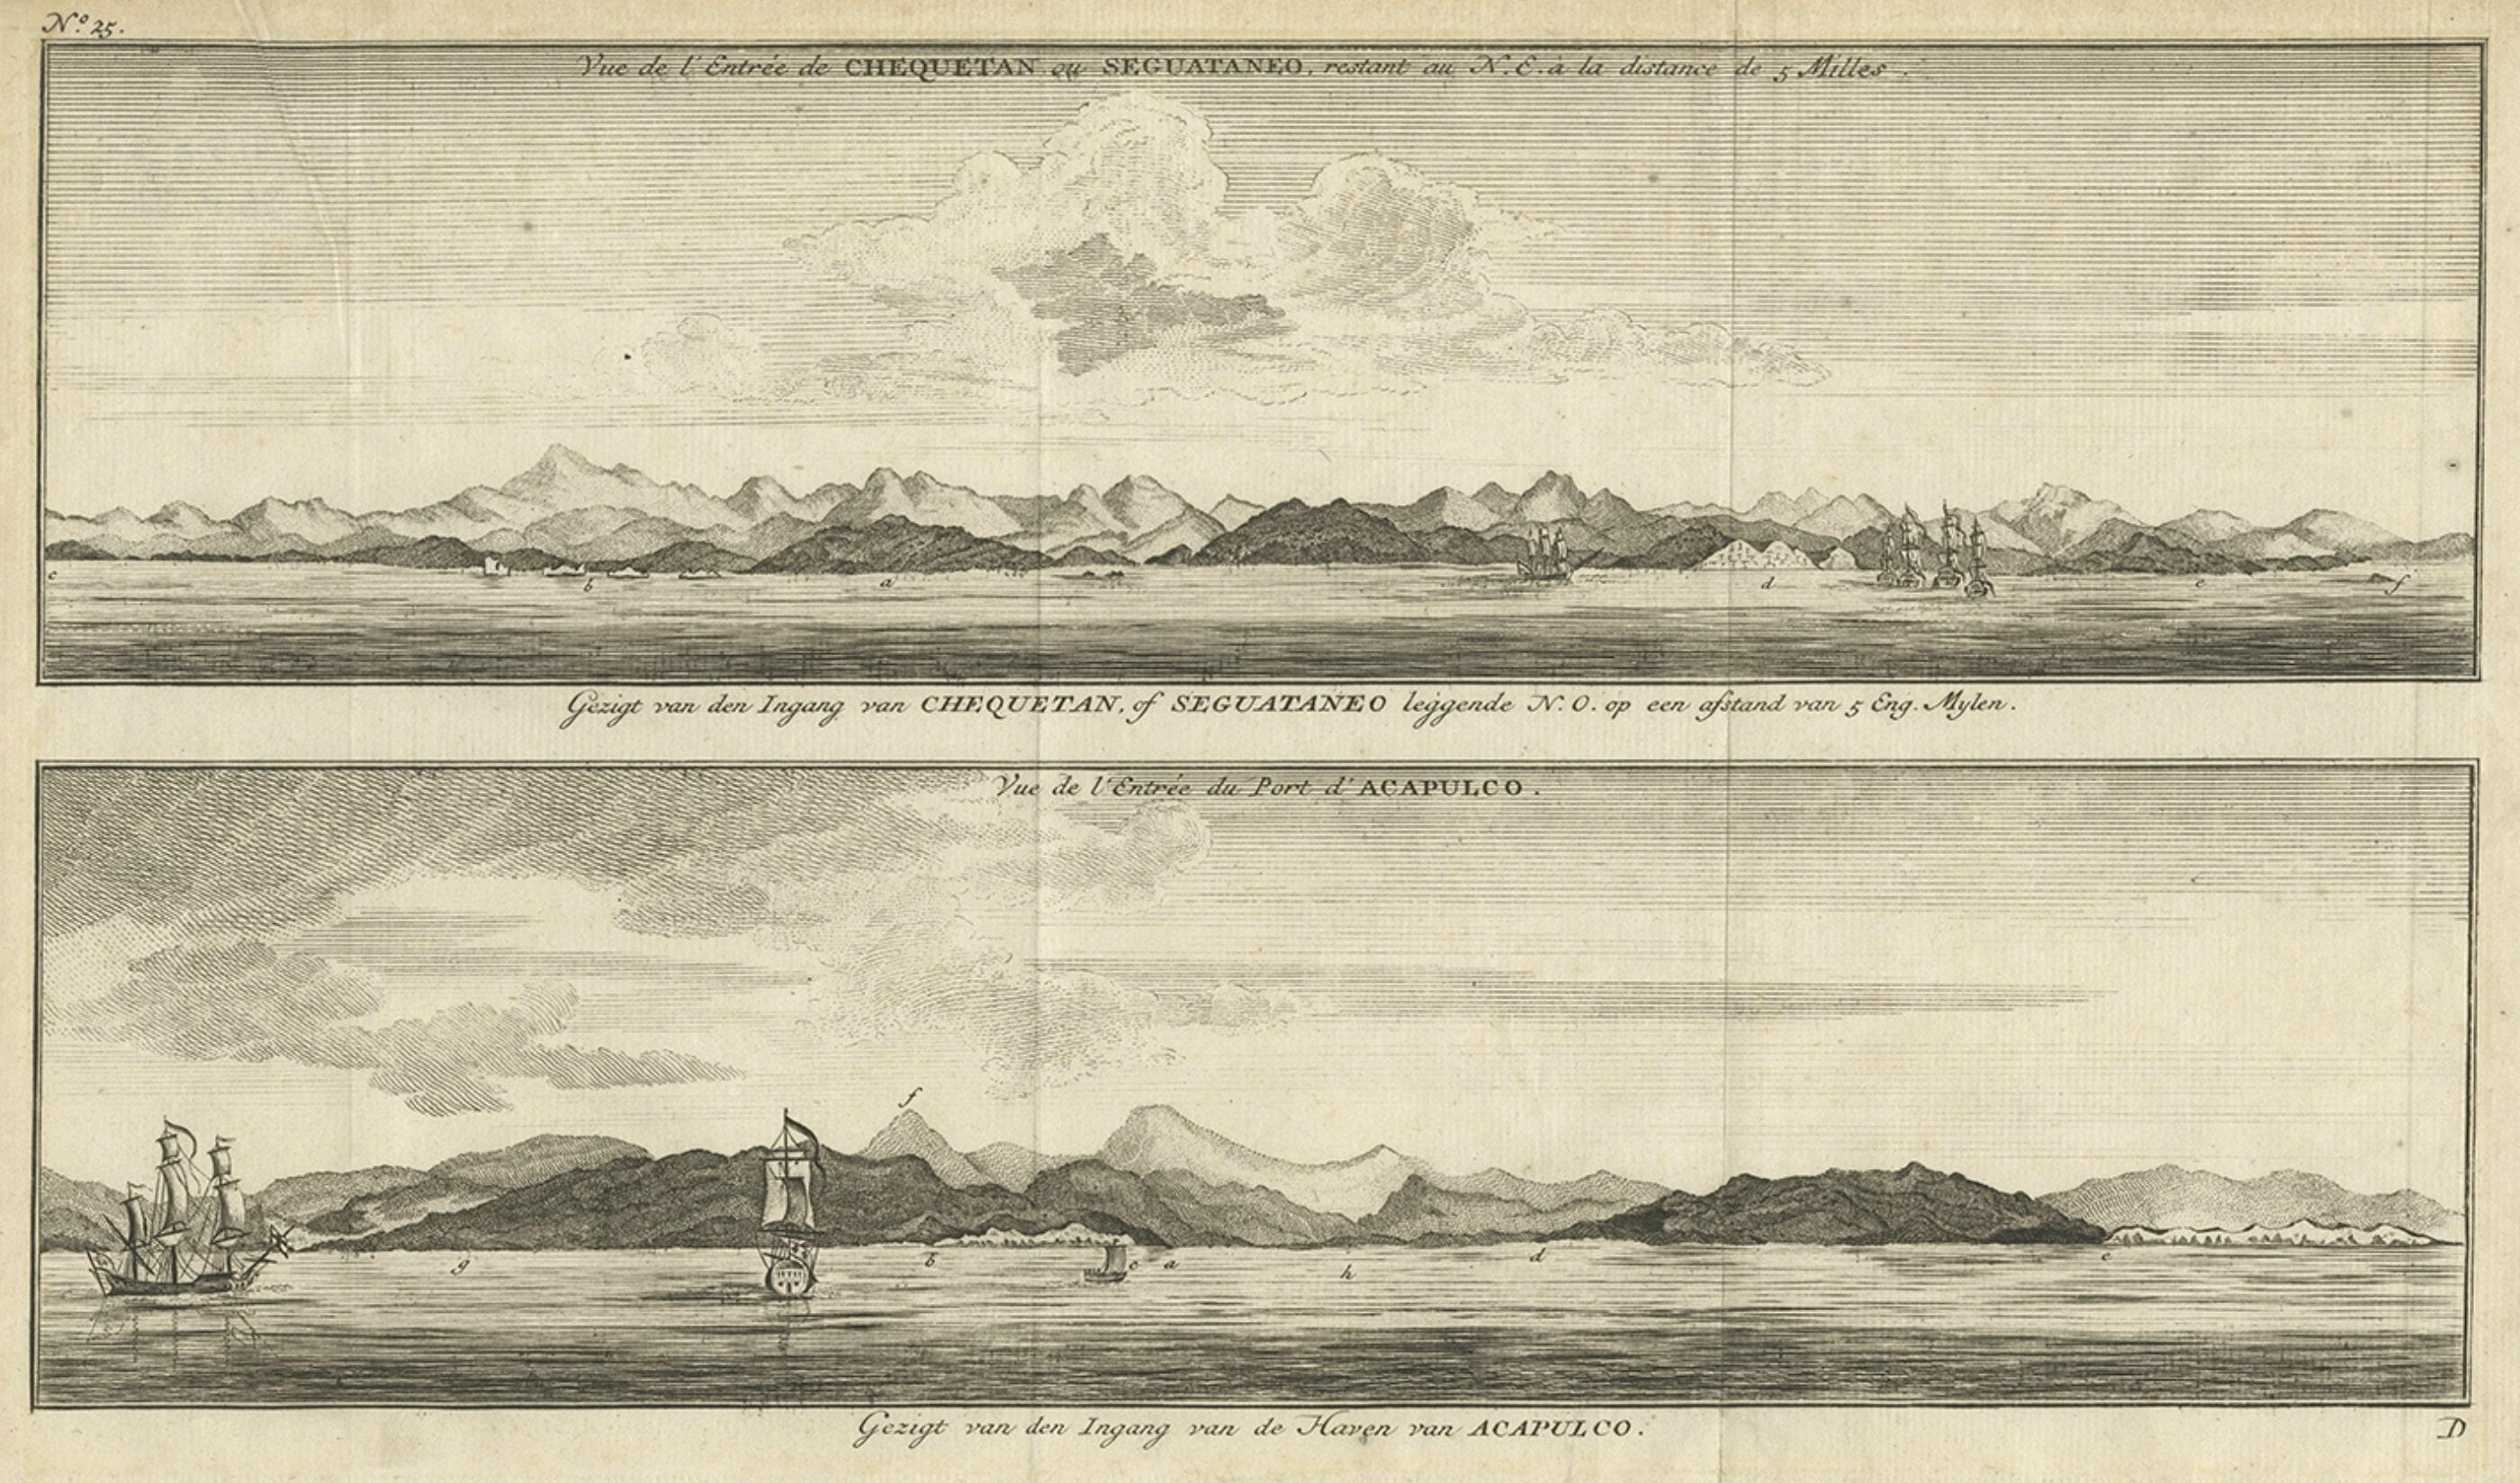 Antique Print of Zihuatanejo and the harbour of Acapulco in South America, 1749